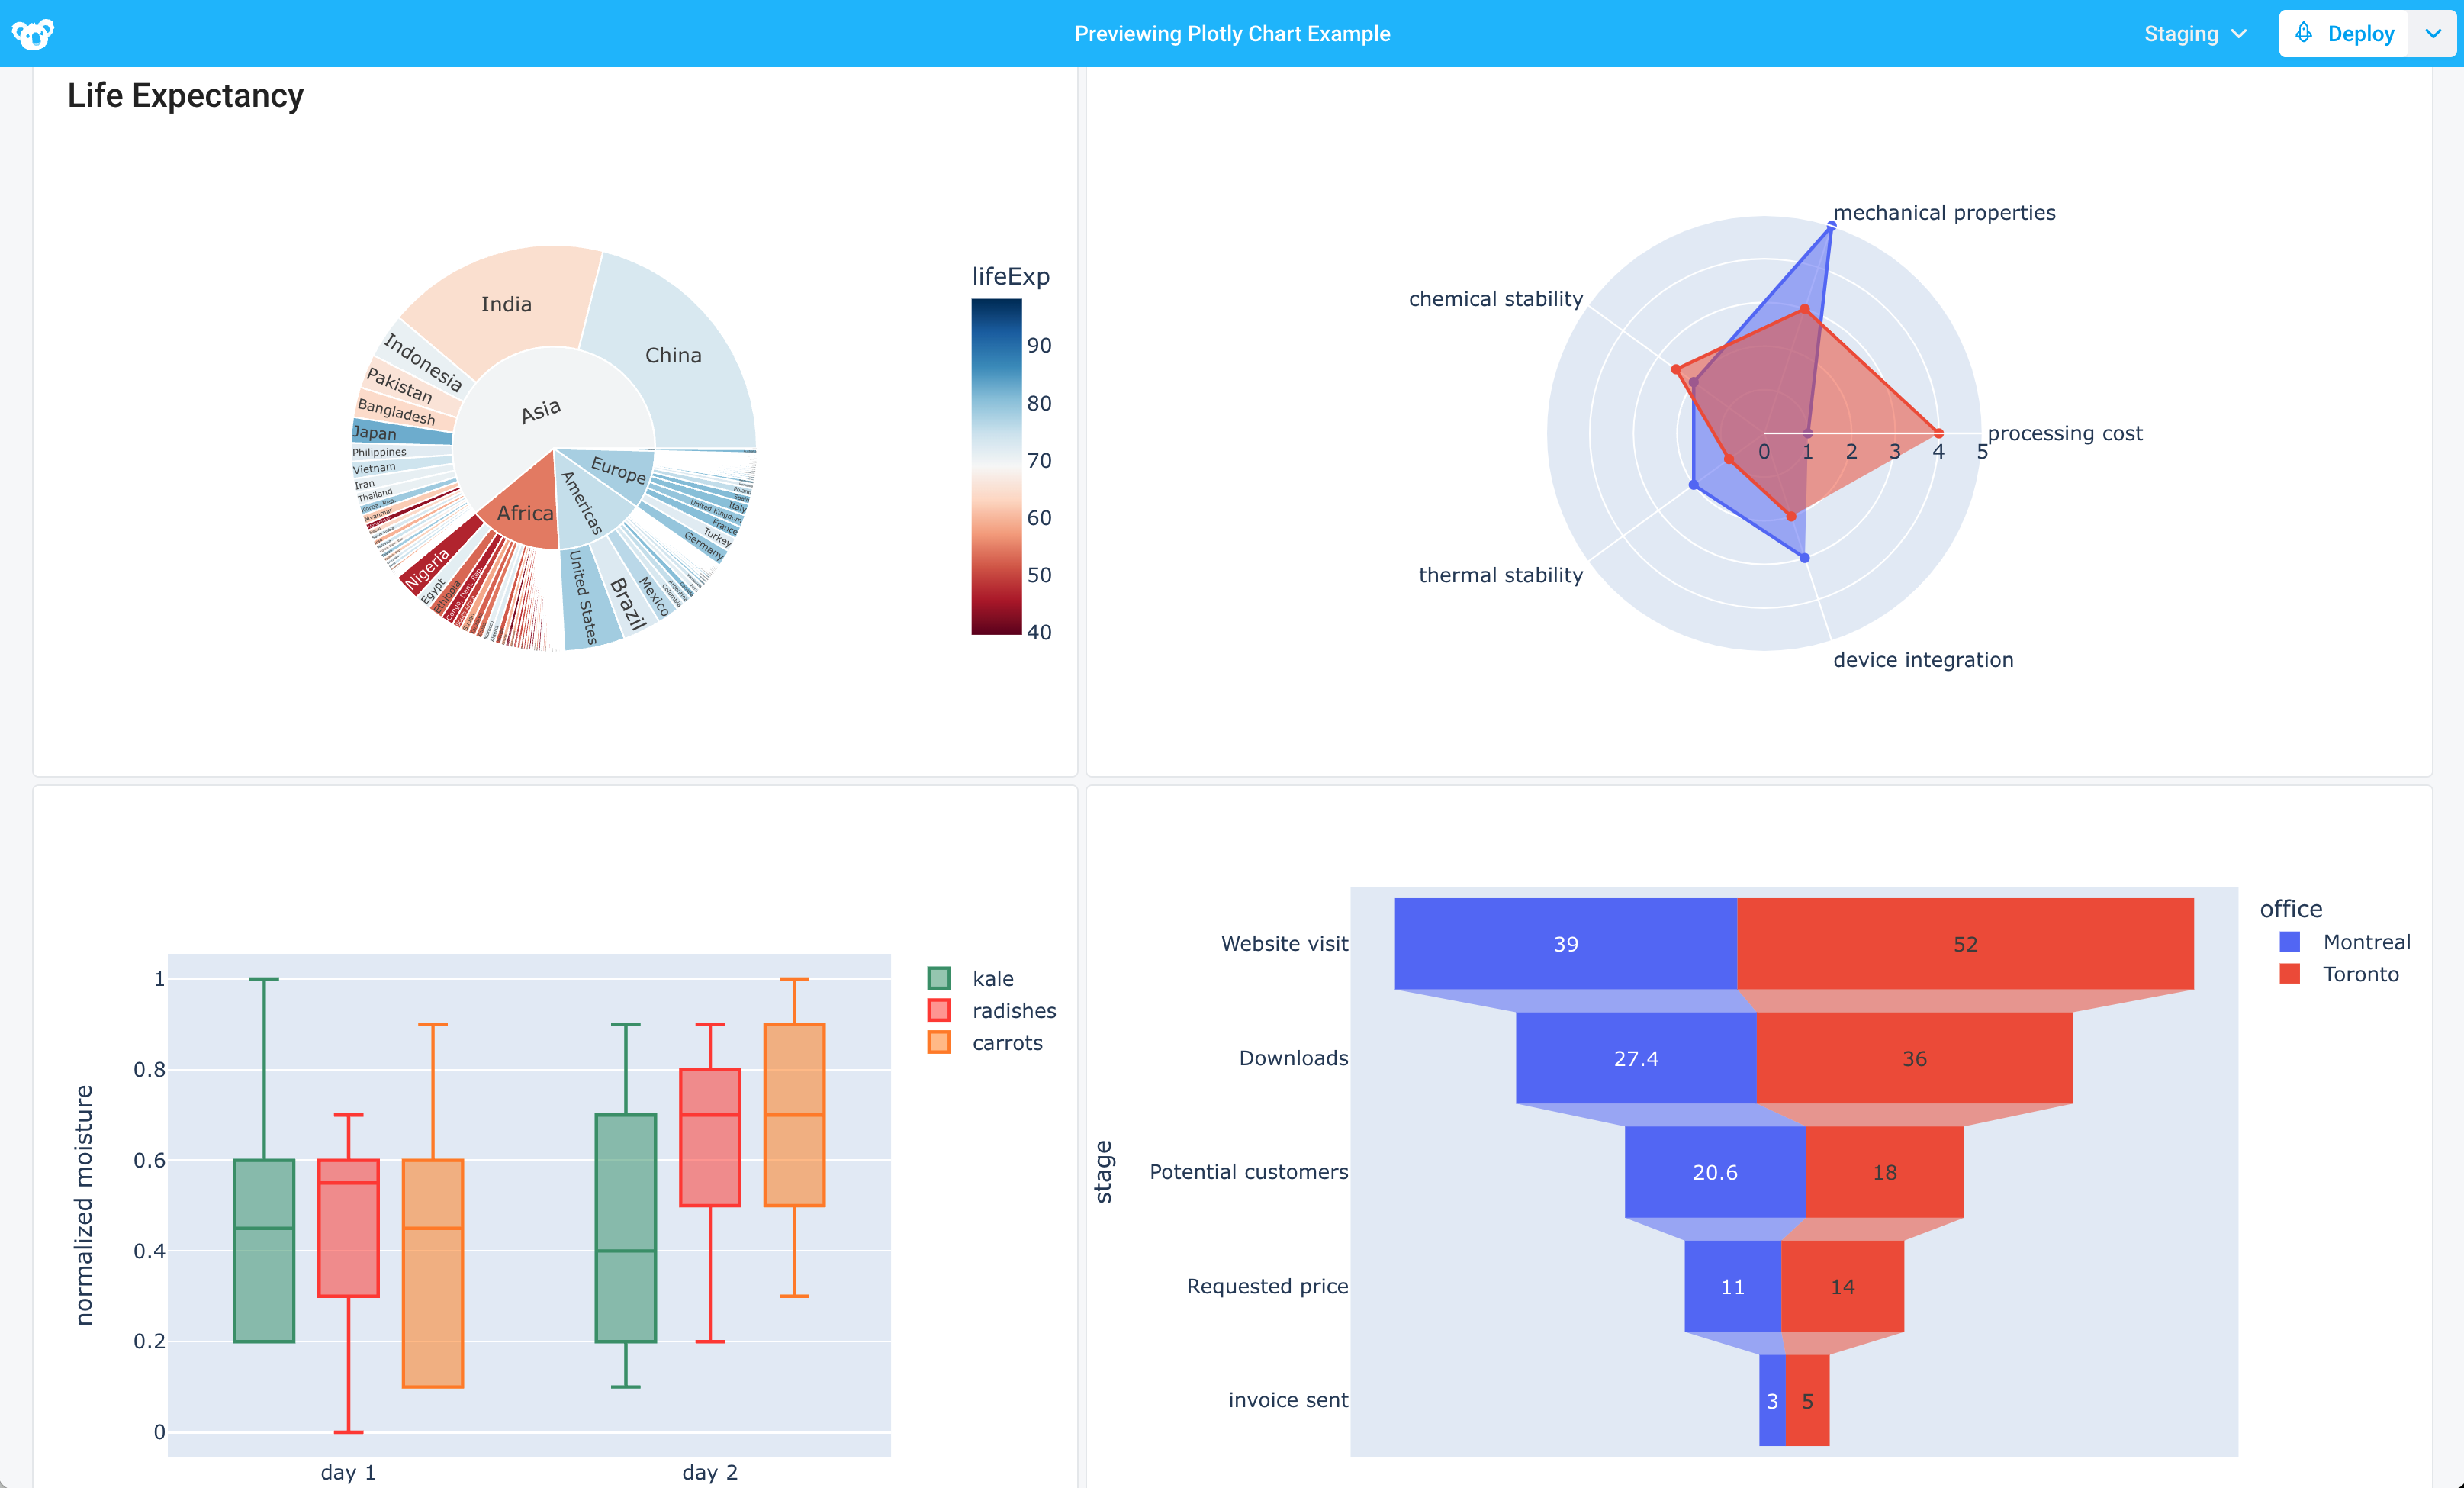 All Plotly chart types are supported